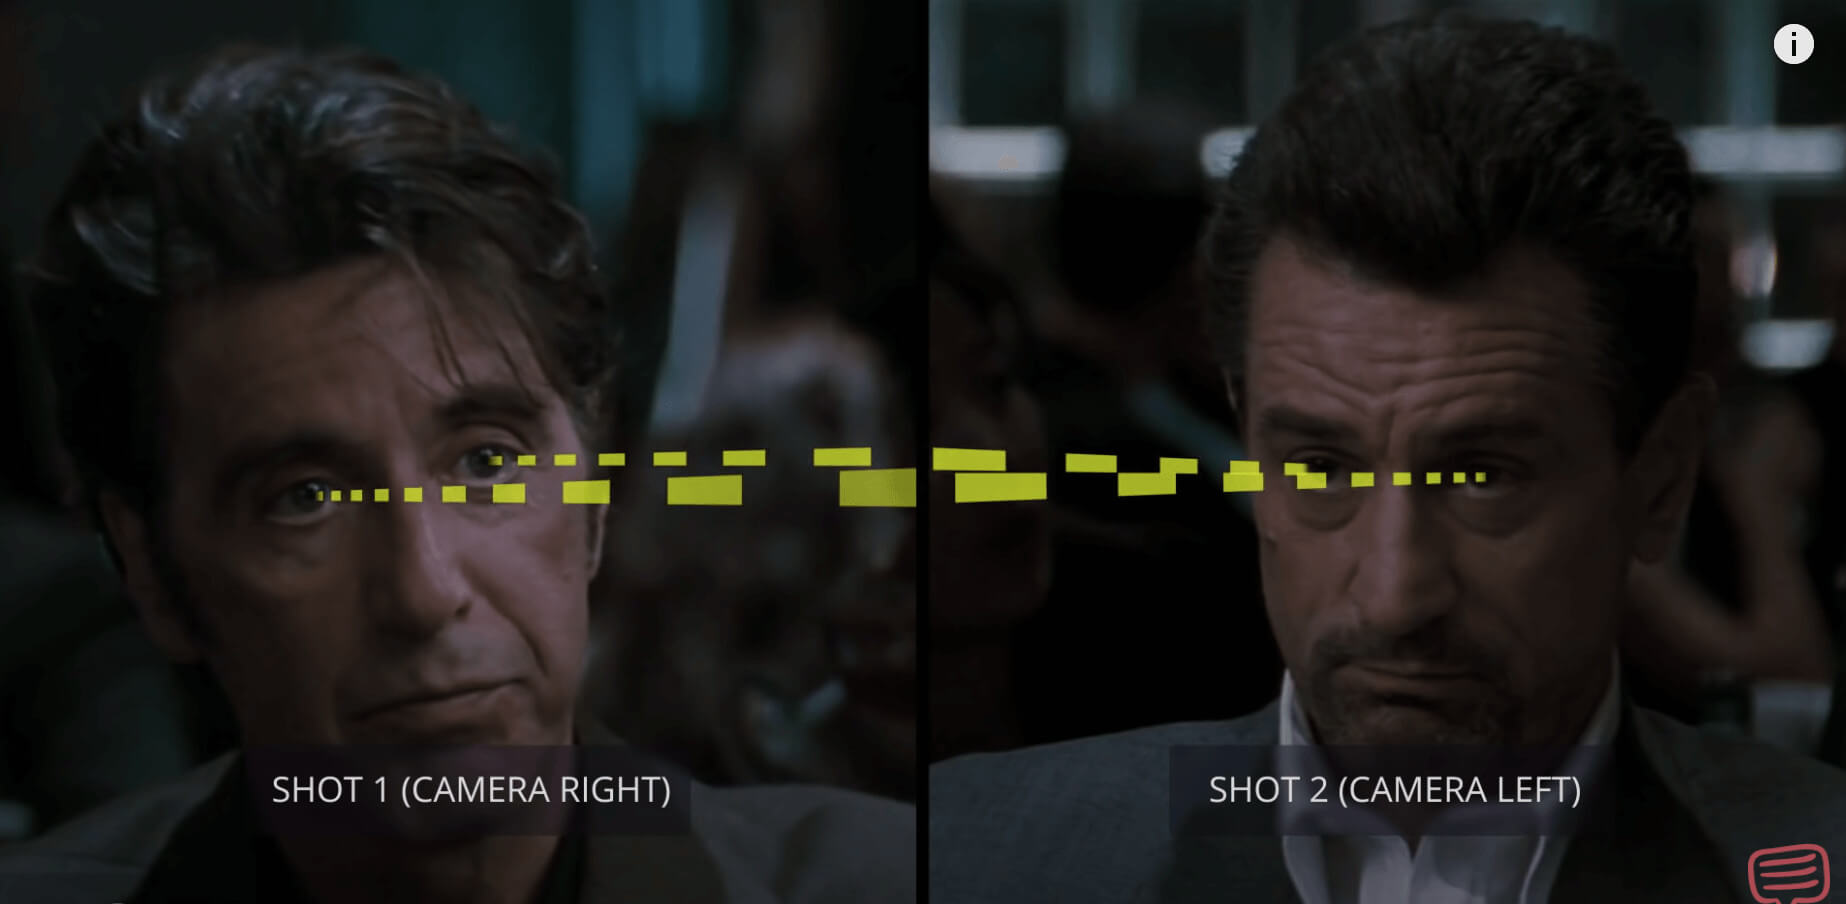 The 180-degree rule in the movie Heat